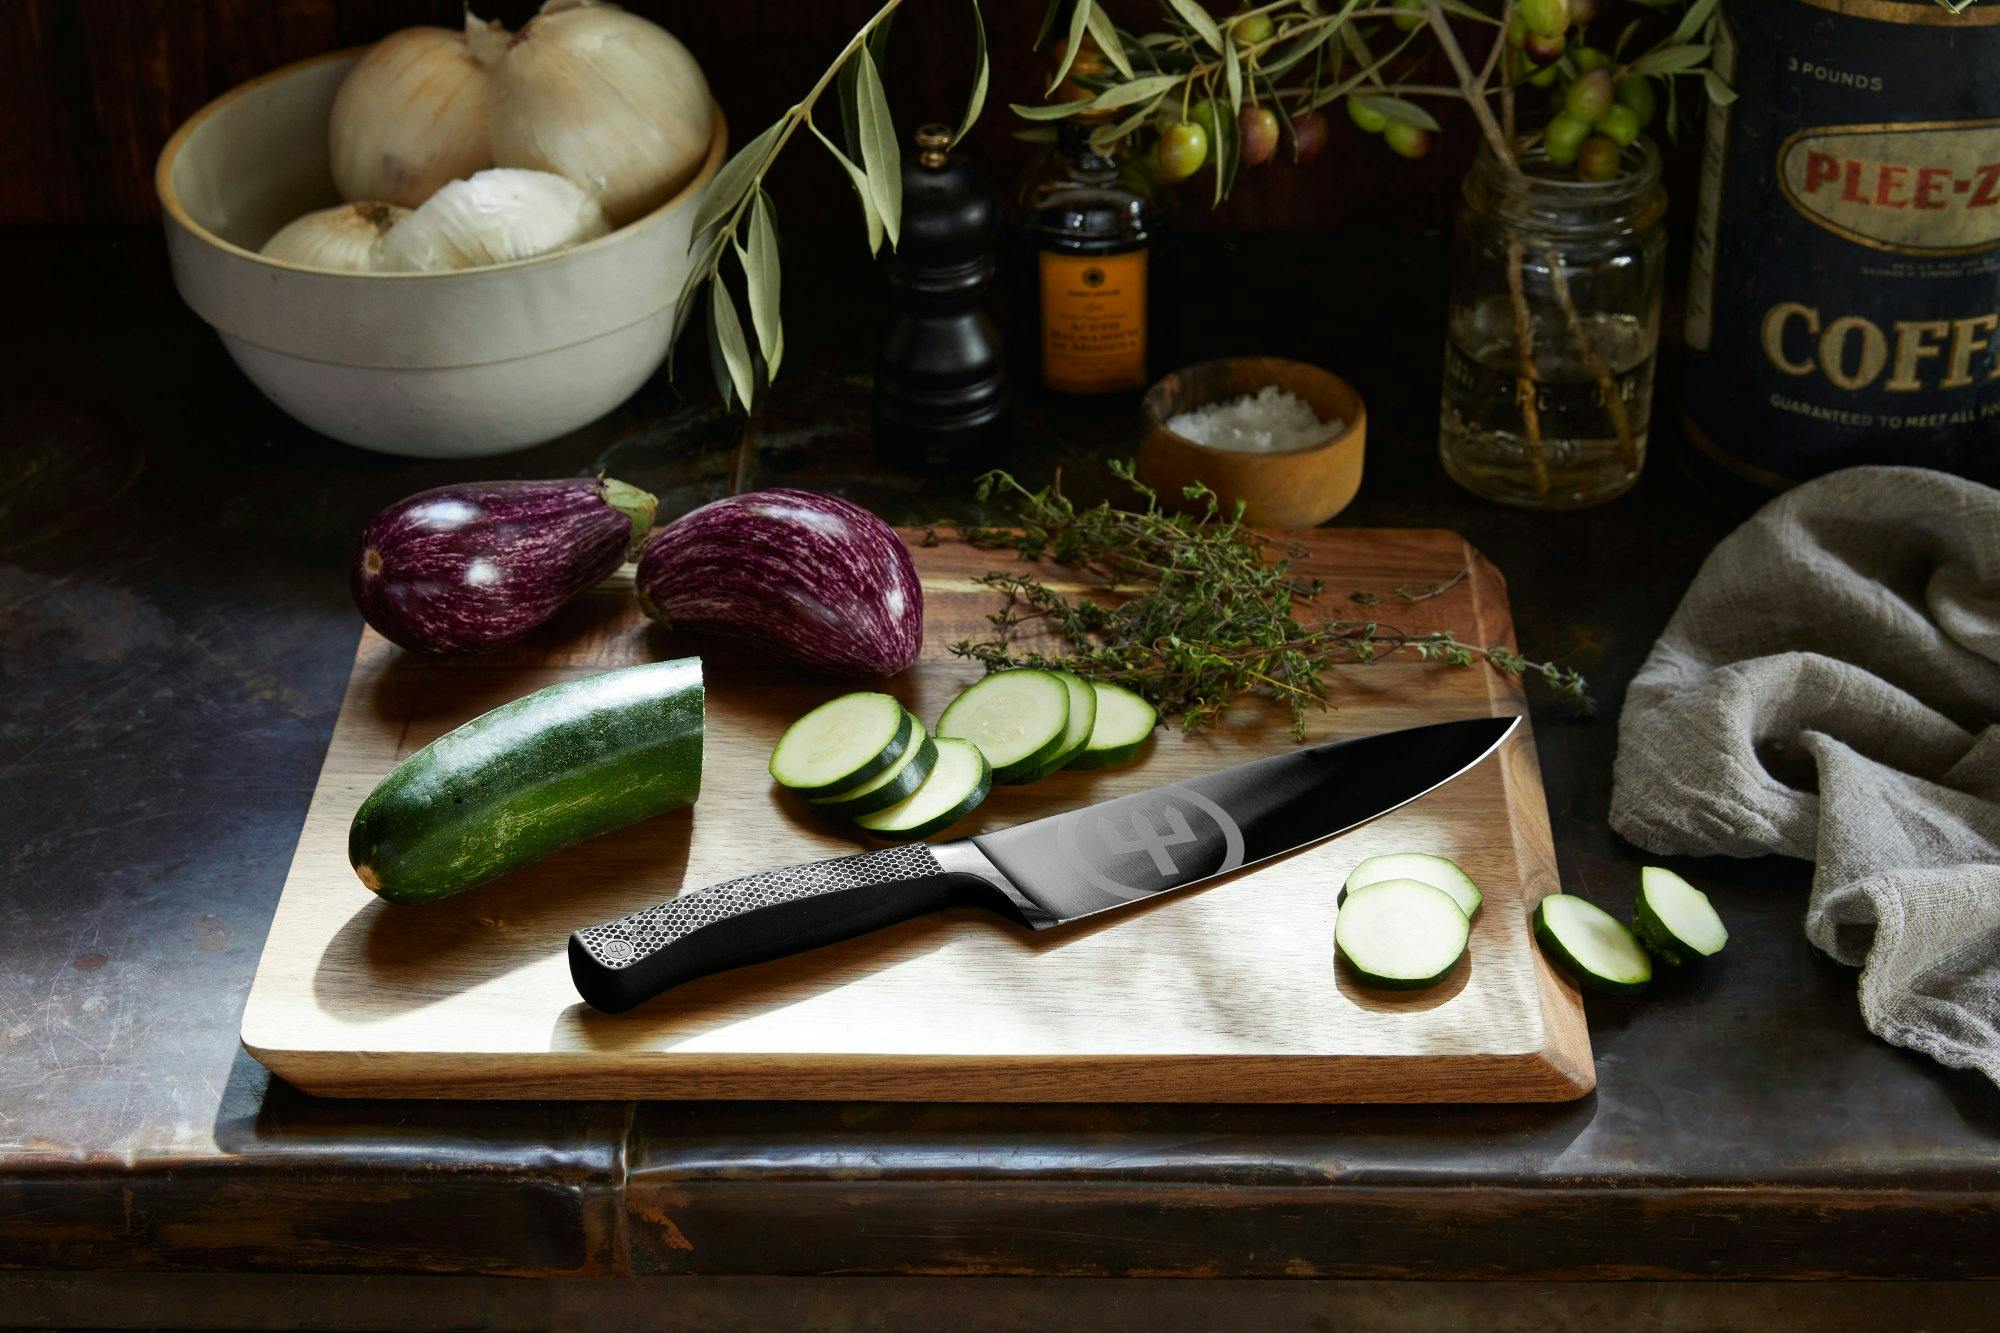 Wusthof Performance Series knife on a cutting board with freshly-sliced cucumber and eggplant